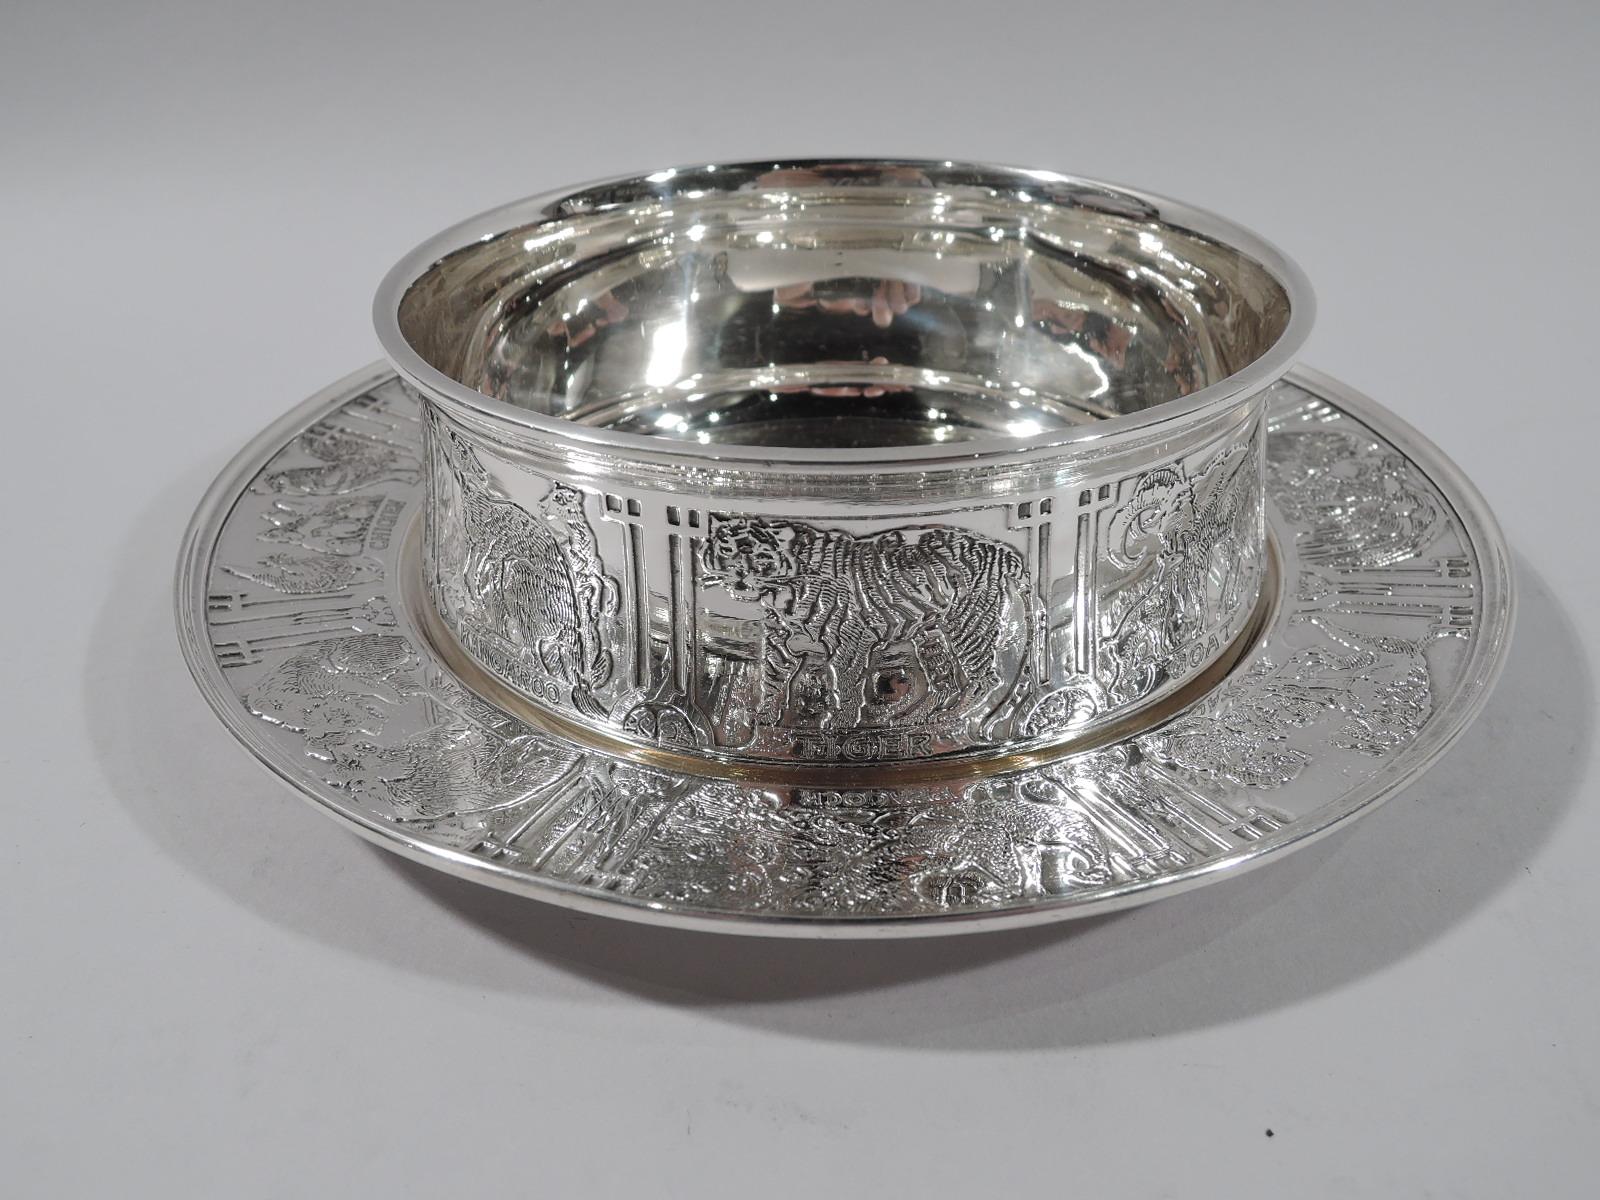 Edwardian sterling silver baby bowl on plate. Made by Kerr in Newark. Bowl has gently upward tapering sides and plain flat rim. Plate has deep plain well. Acid-etched menagerie with lions and tigers and bears as well as domestic critters like cats